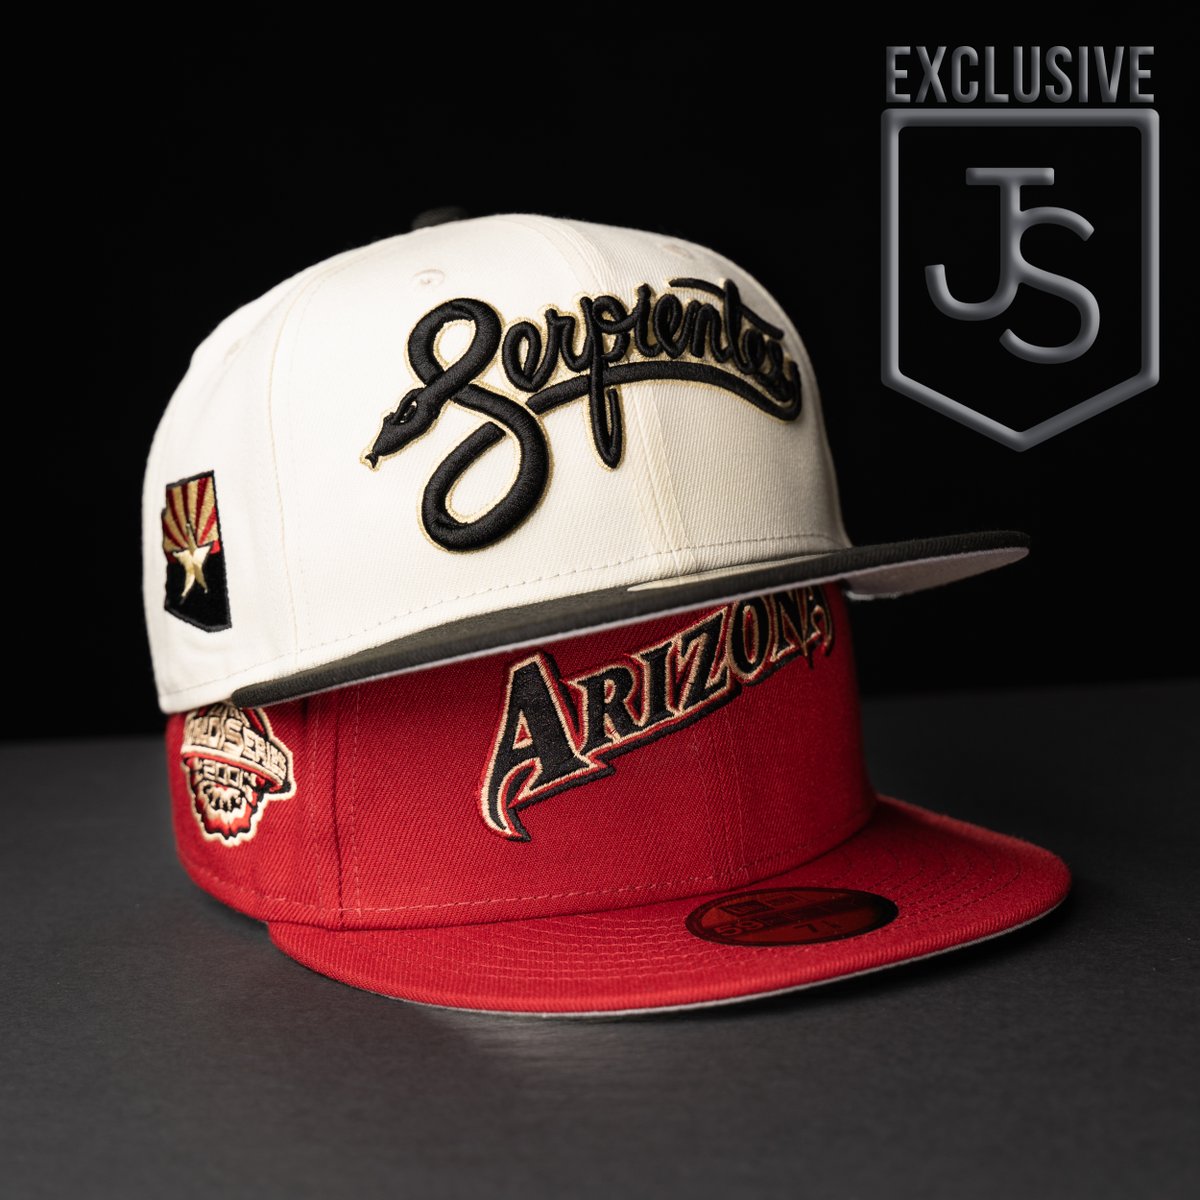 More D-Backs Just Sports Exclusive restocks have arrived. These, and more, are again available online and in-store. @NewEraCap #59fifty #fitted #fittedhats #justsportsexclusive

smily.bio/justsportsaz